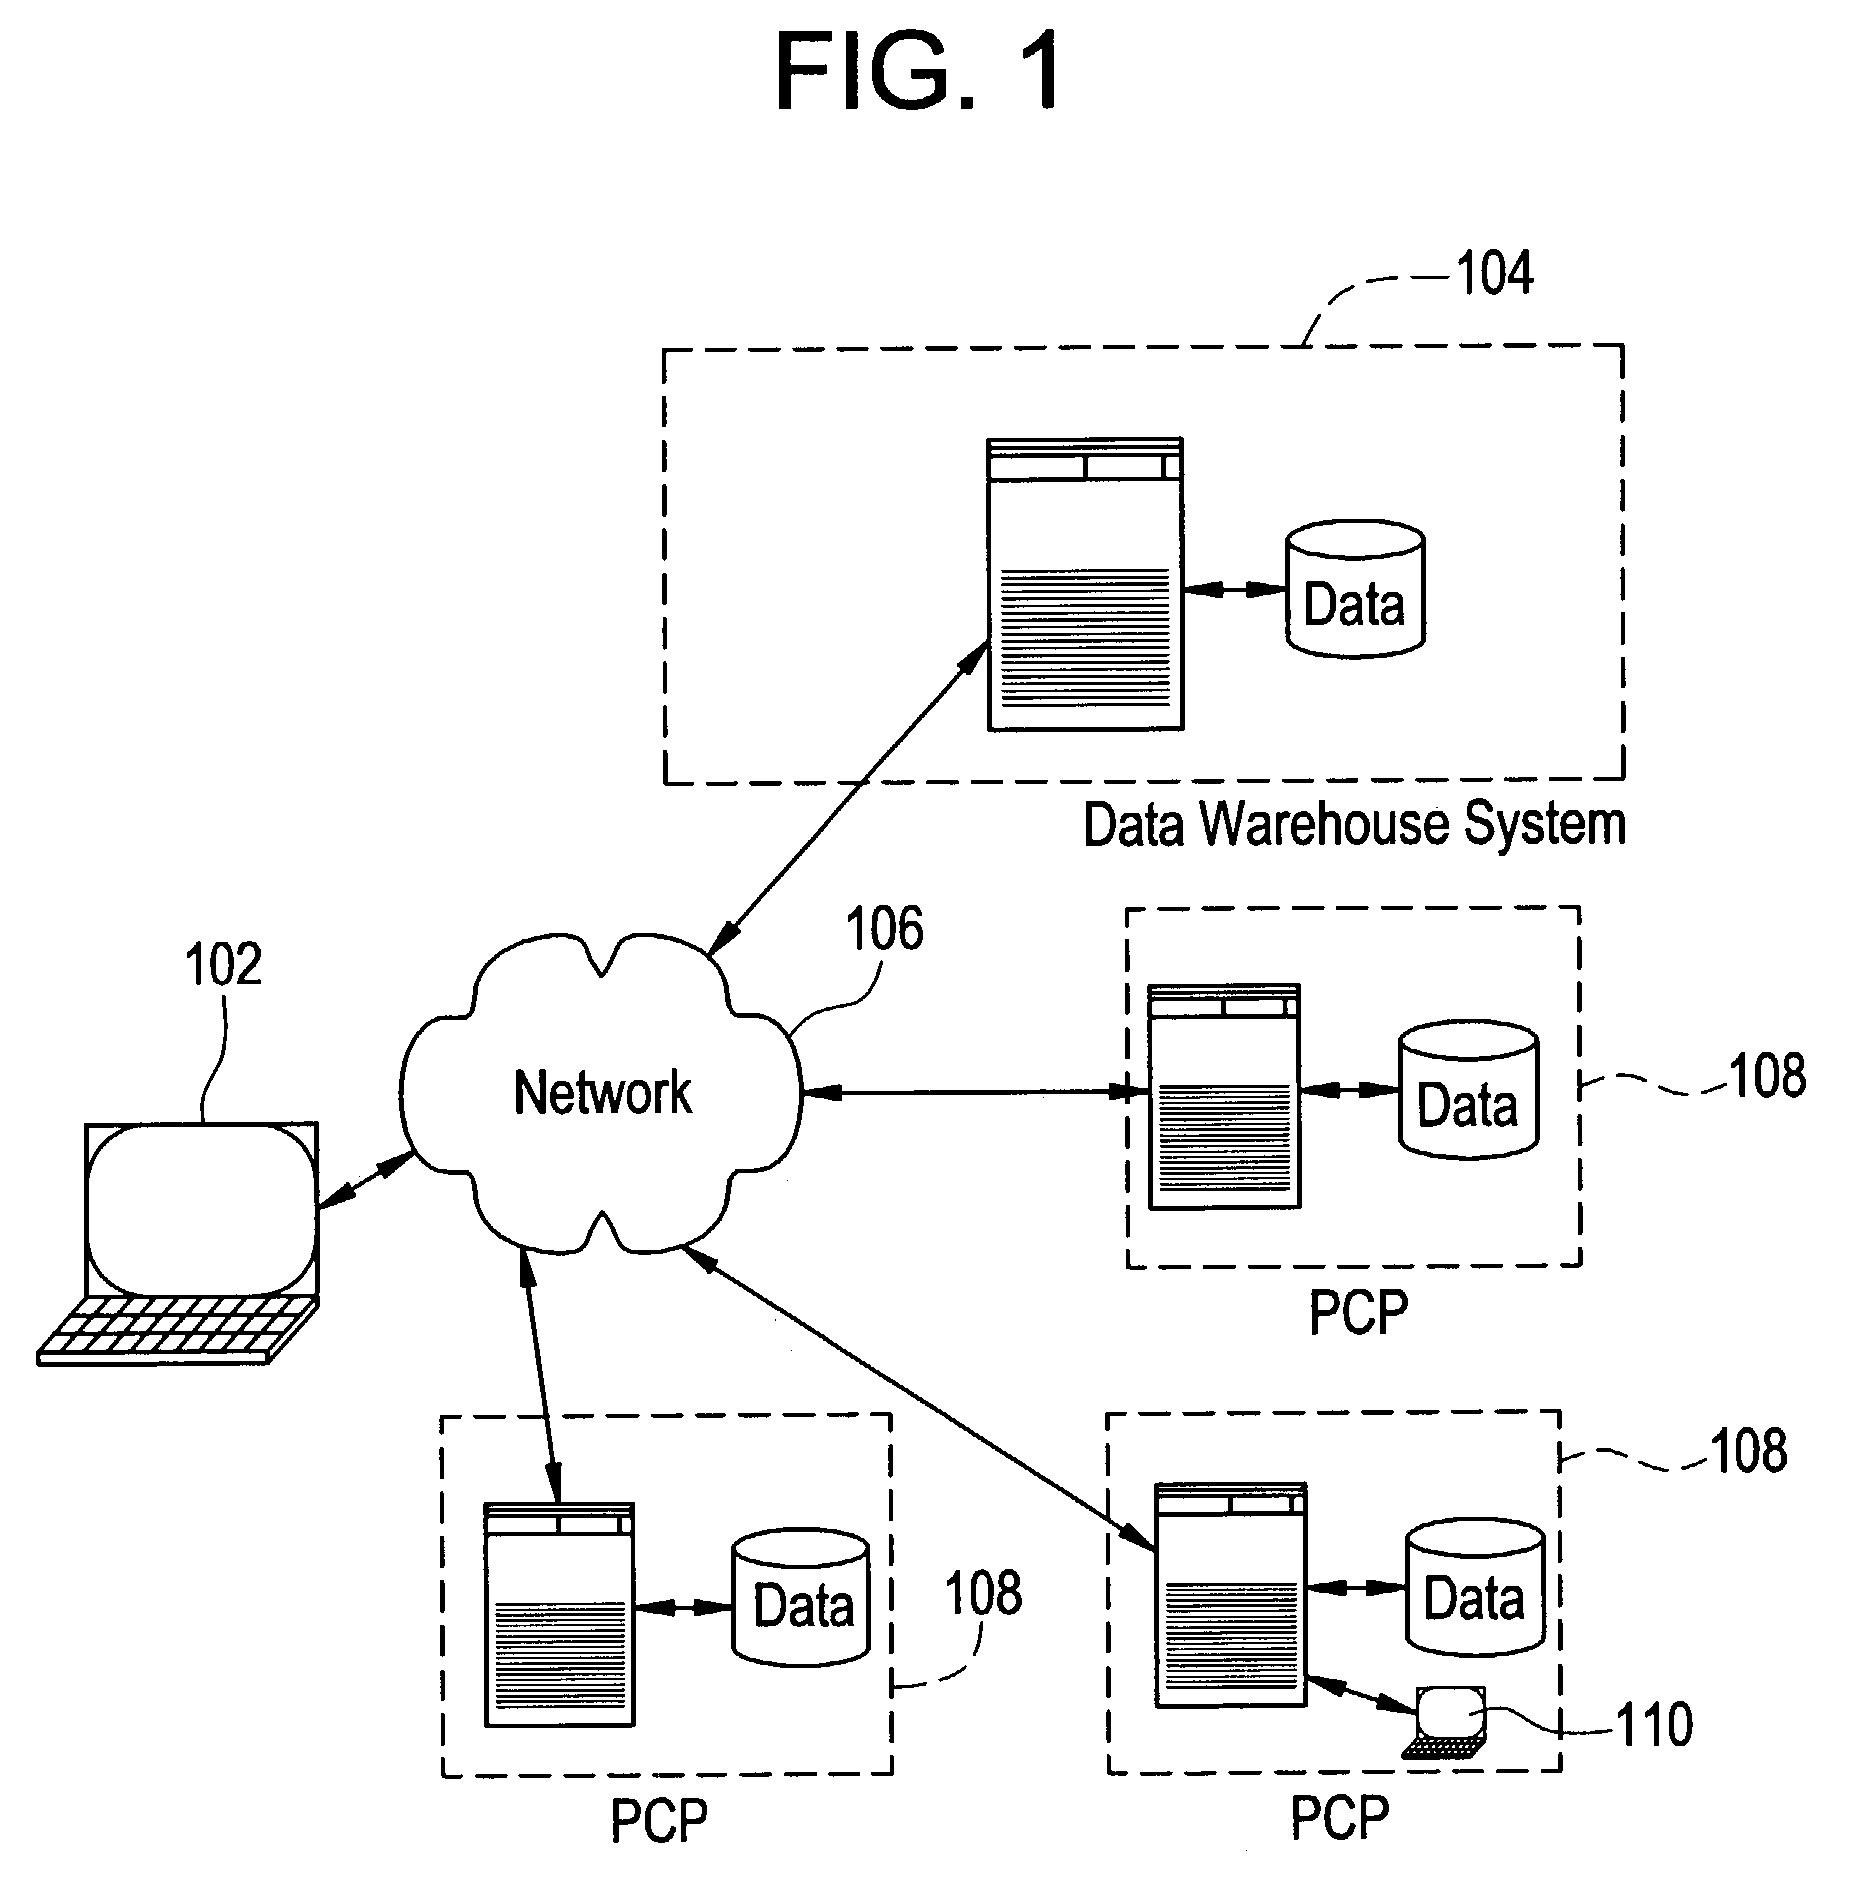 Method, system and computer product for securing patient identity